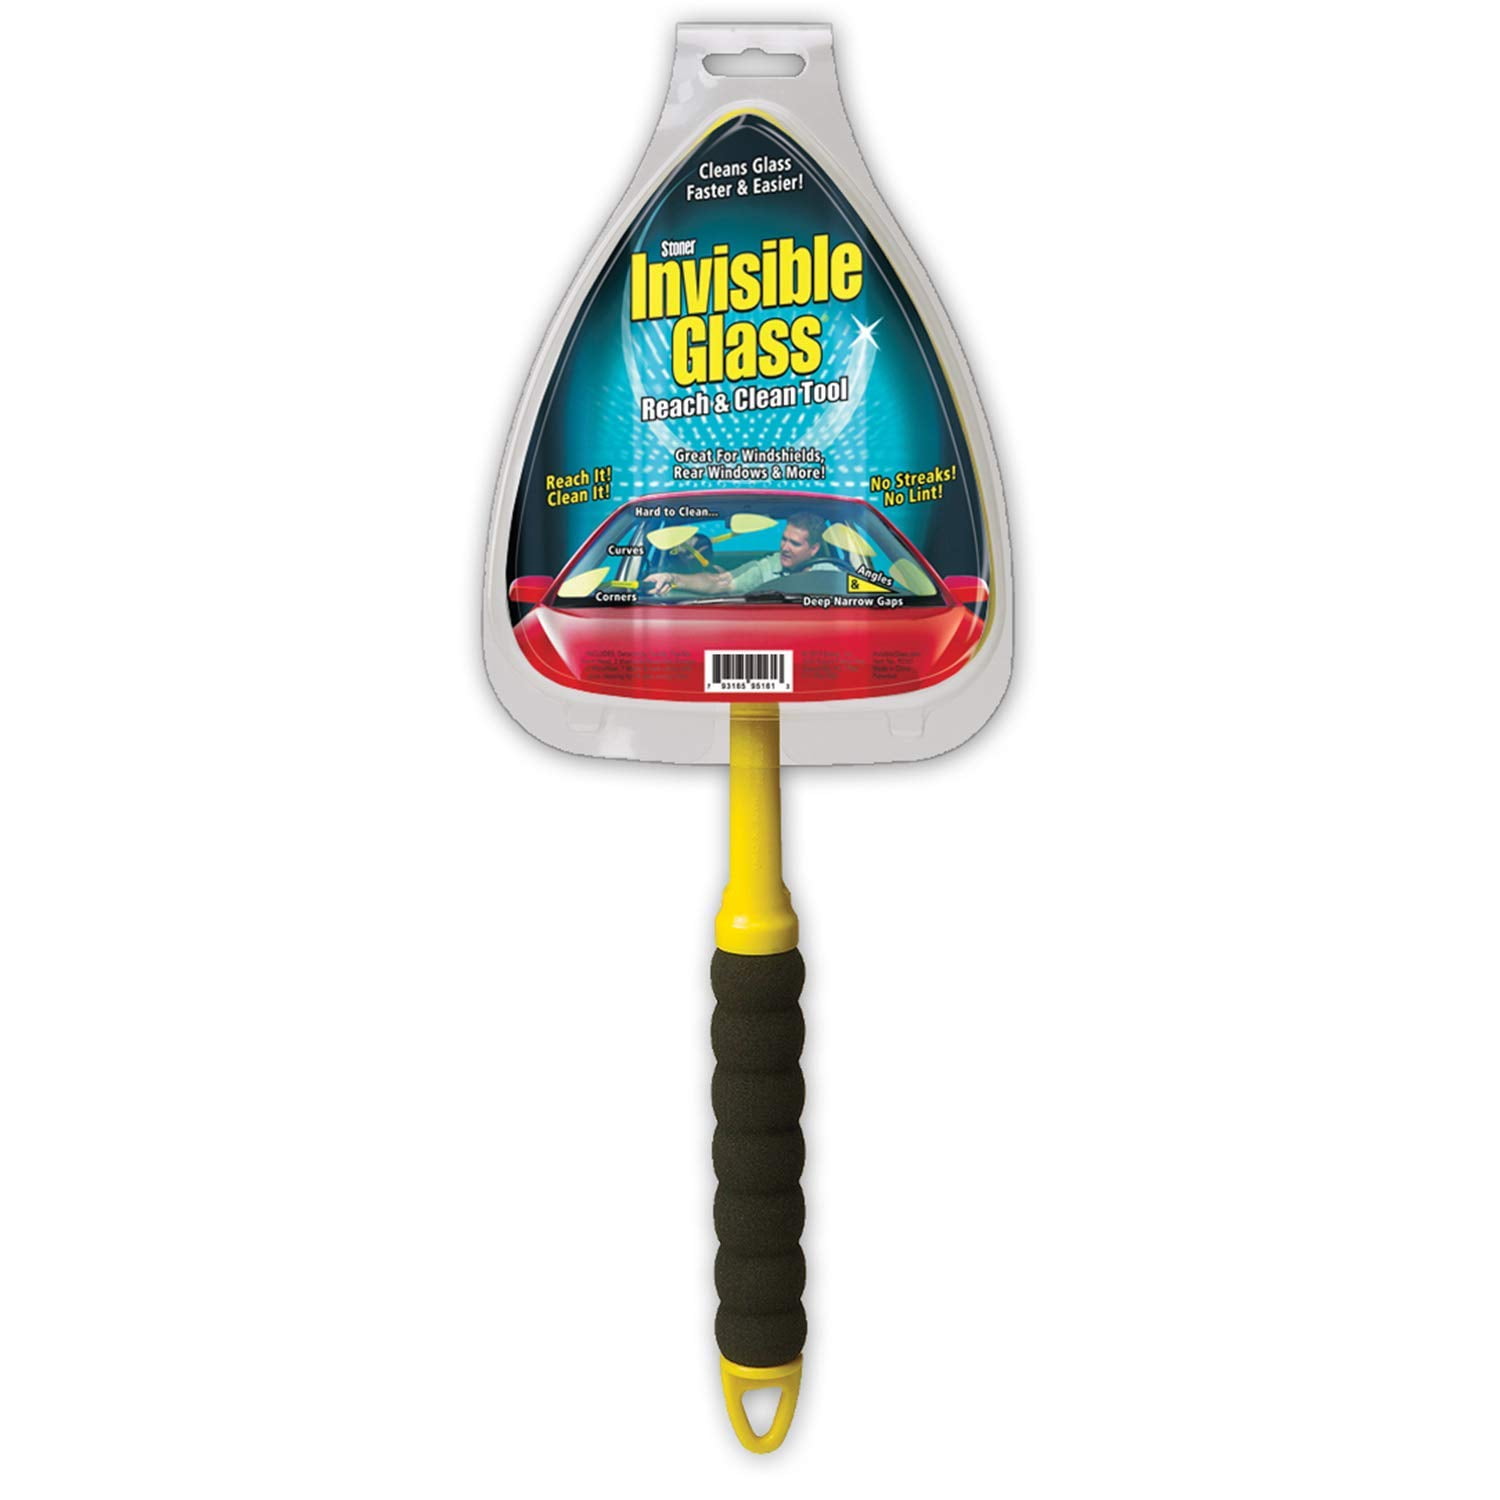 Stoner Invisible Glass Reach & Clean Combo, glass cleaner, reach & clean  tool, windshield cleaner